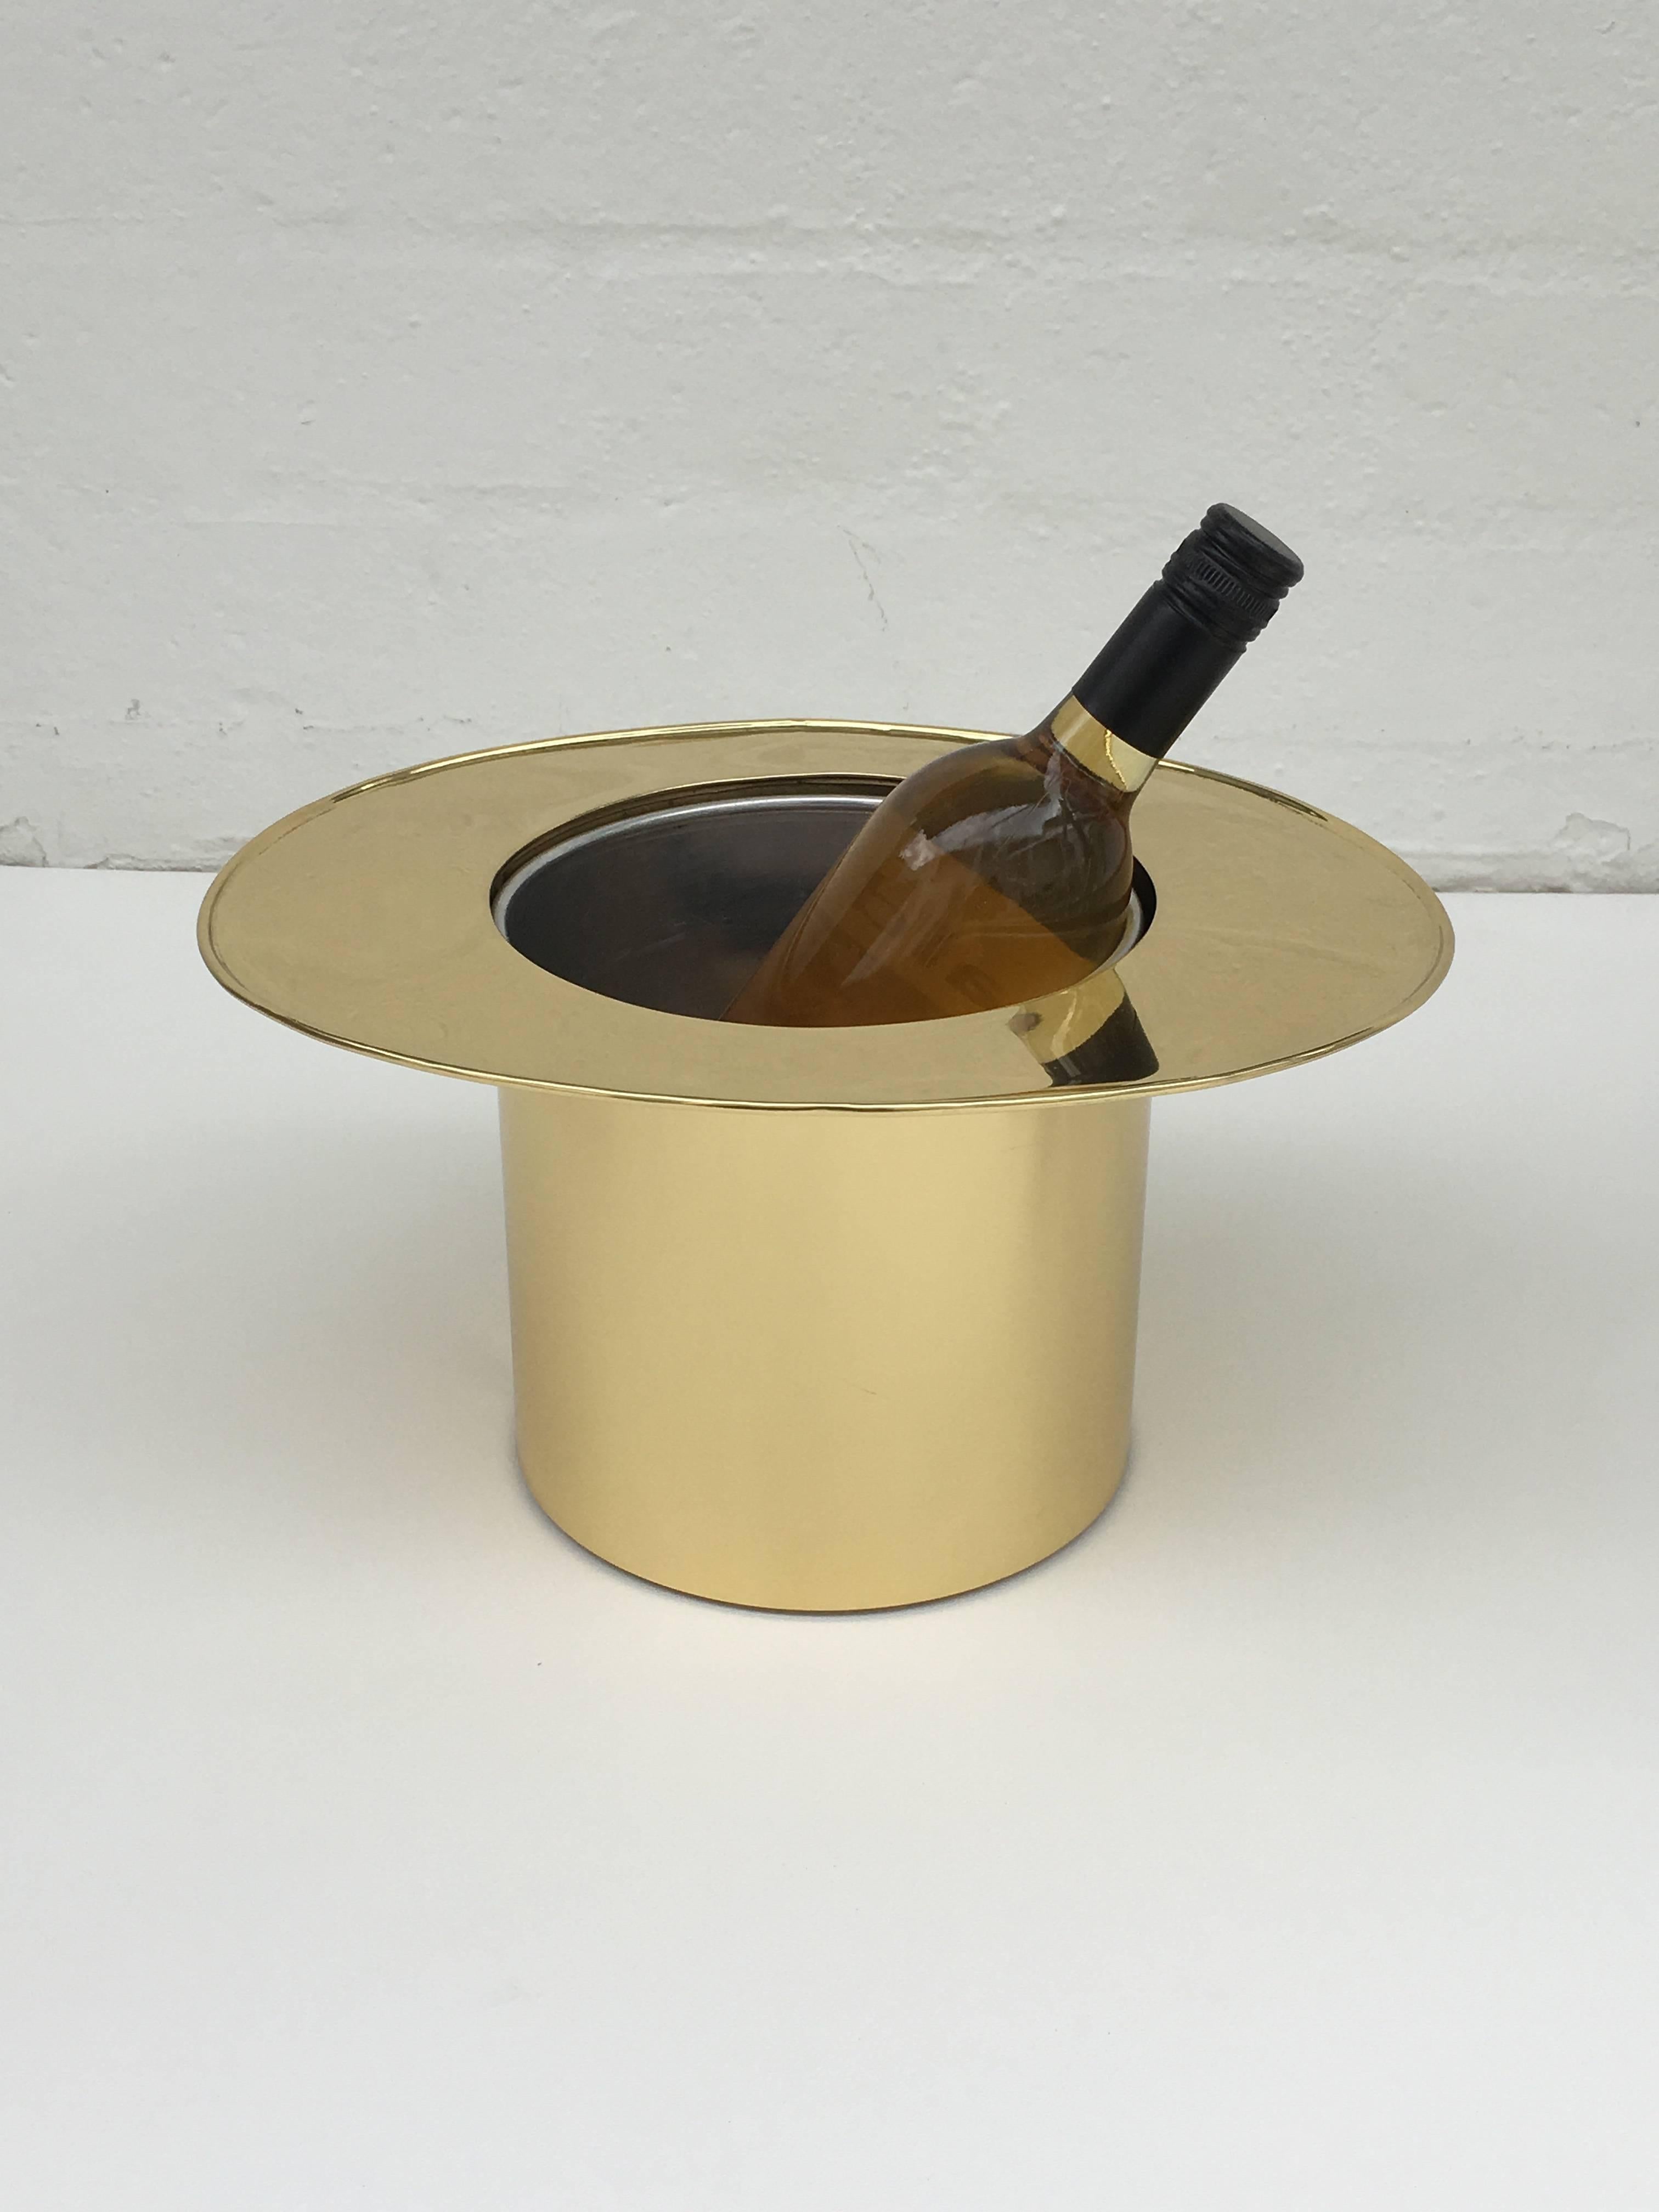 A cool polished brass Italian ice bucket with an aluminum insert from the 1970s.
Newly replated.